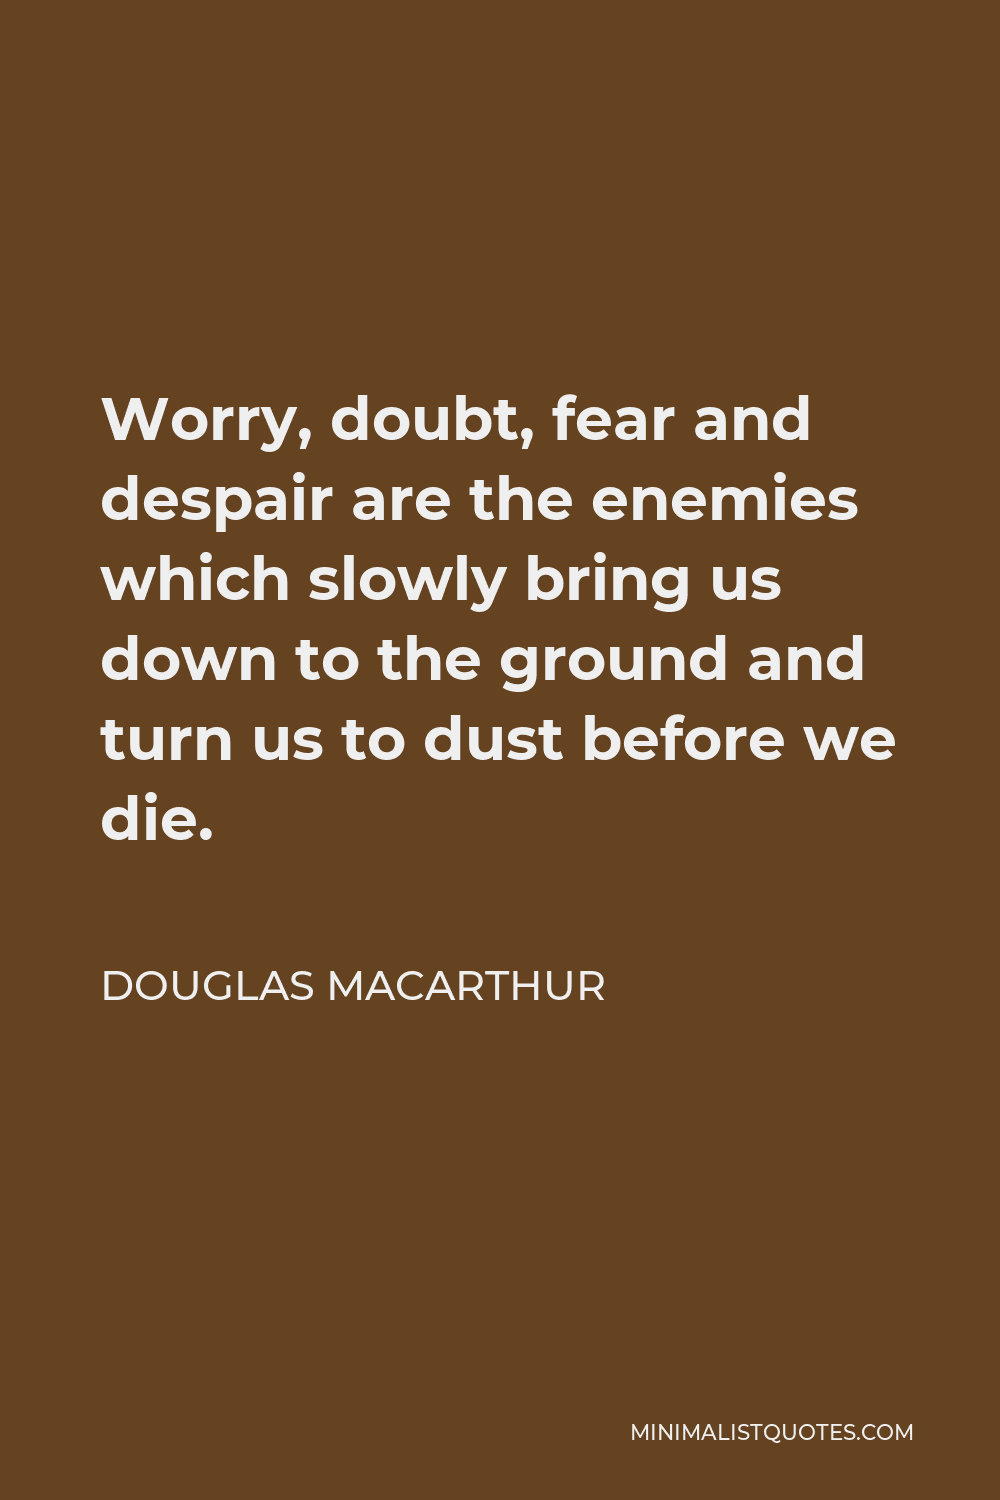 Douglas MacArthur Quote - Worry, doubt, fear and despair are the enemies which slowly bring us down to the ground and turn us to dust before we die.